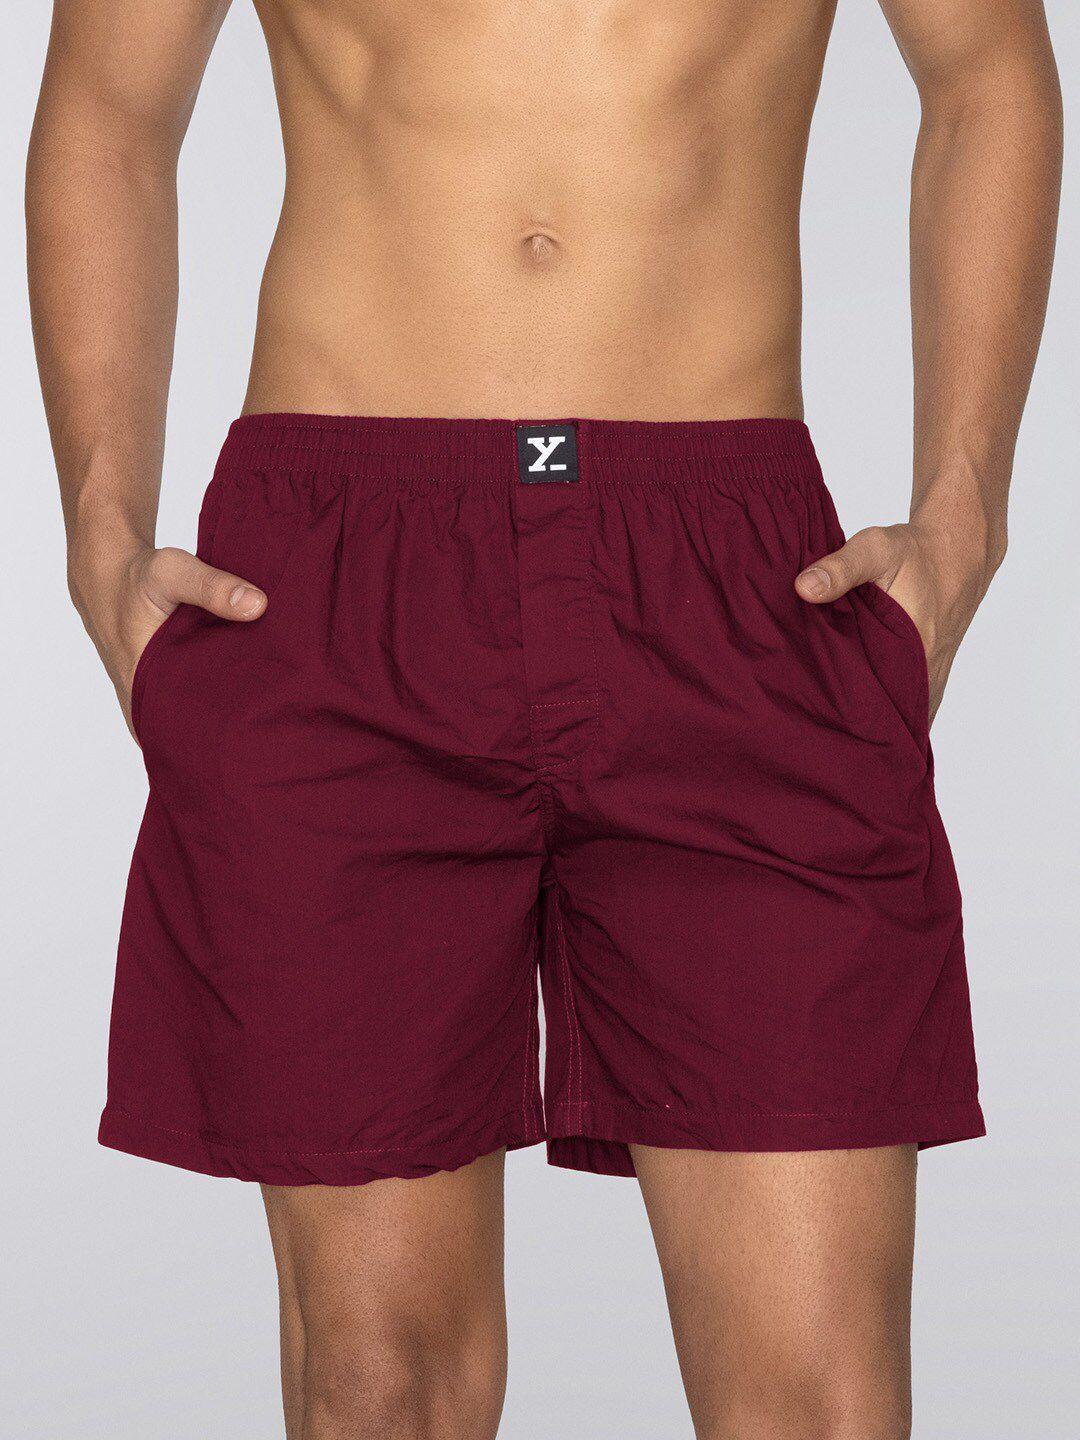 xyxx mid-rise combed cotton boxers